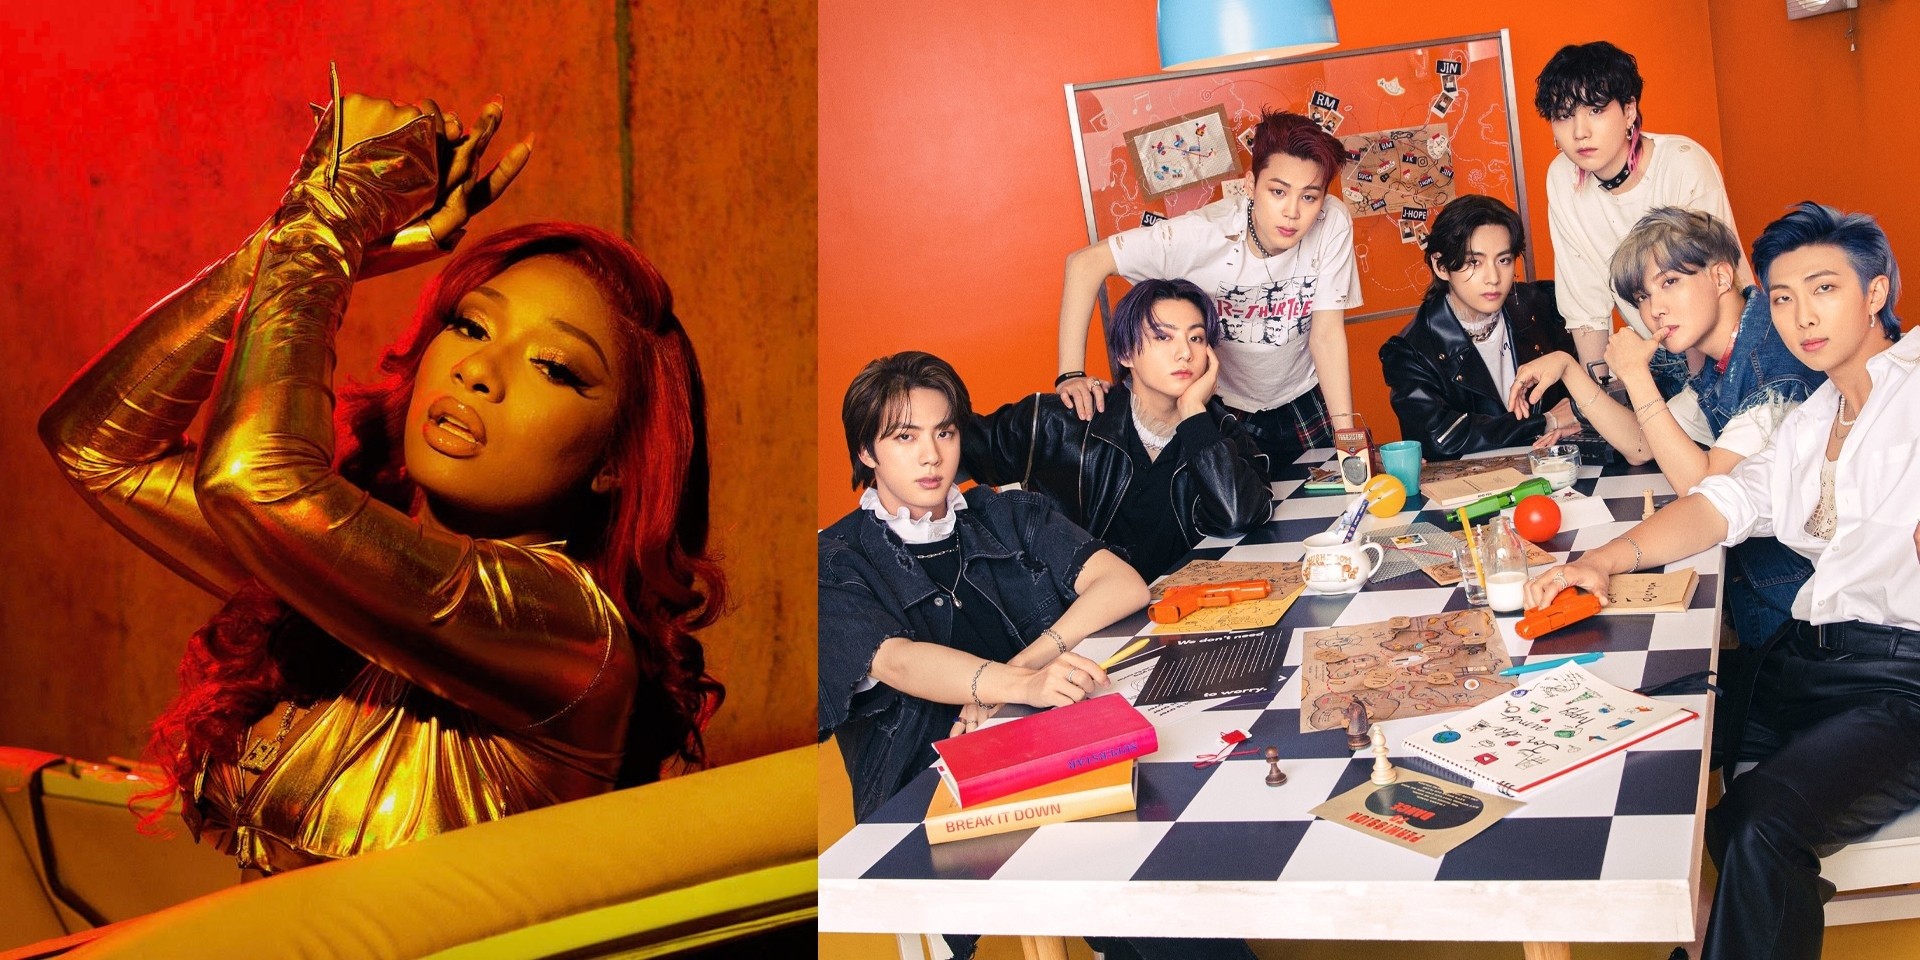 Megan Thee Stallion will no longer join BTS for 'Butter' performance at American Music Awards 2021: "Due to an unexpected personal matter, I can no longer attend"